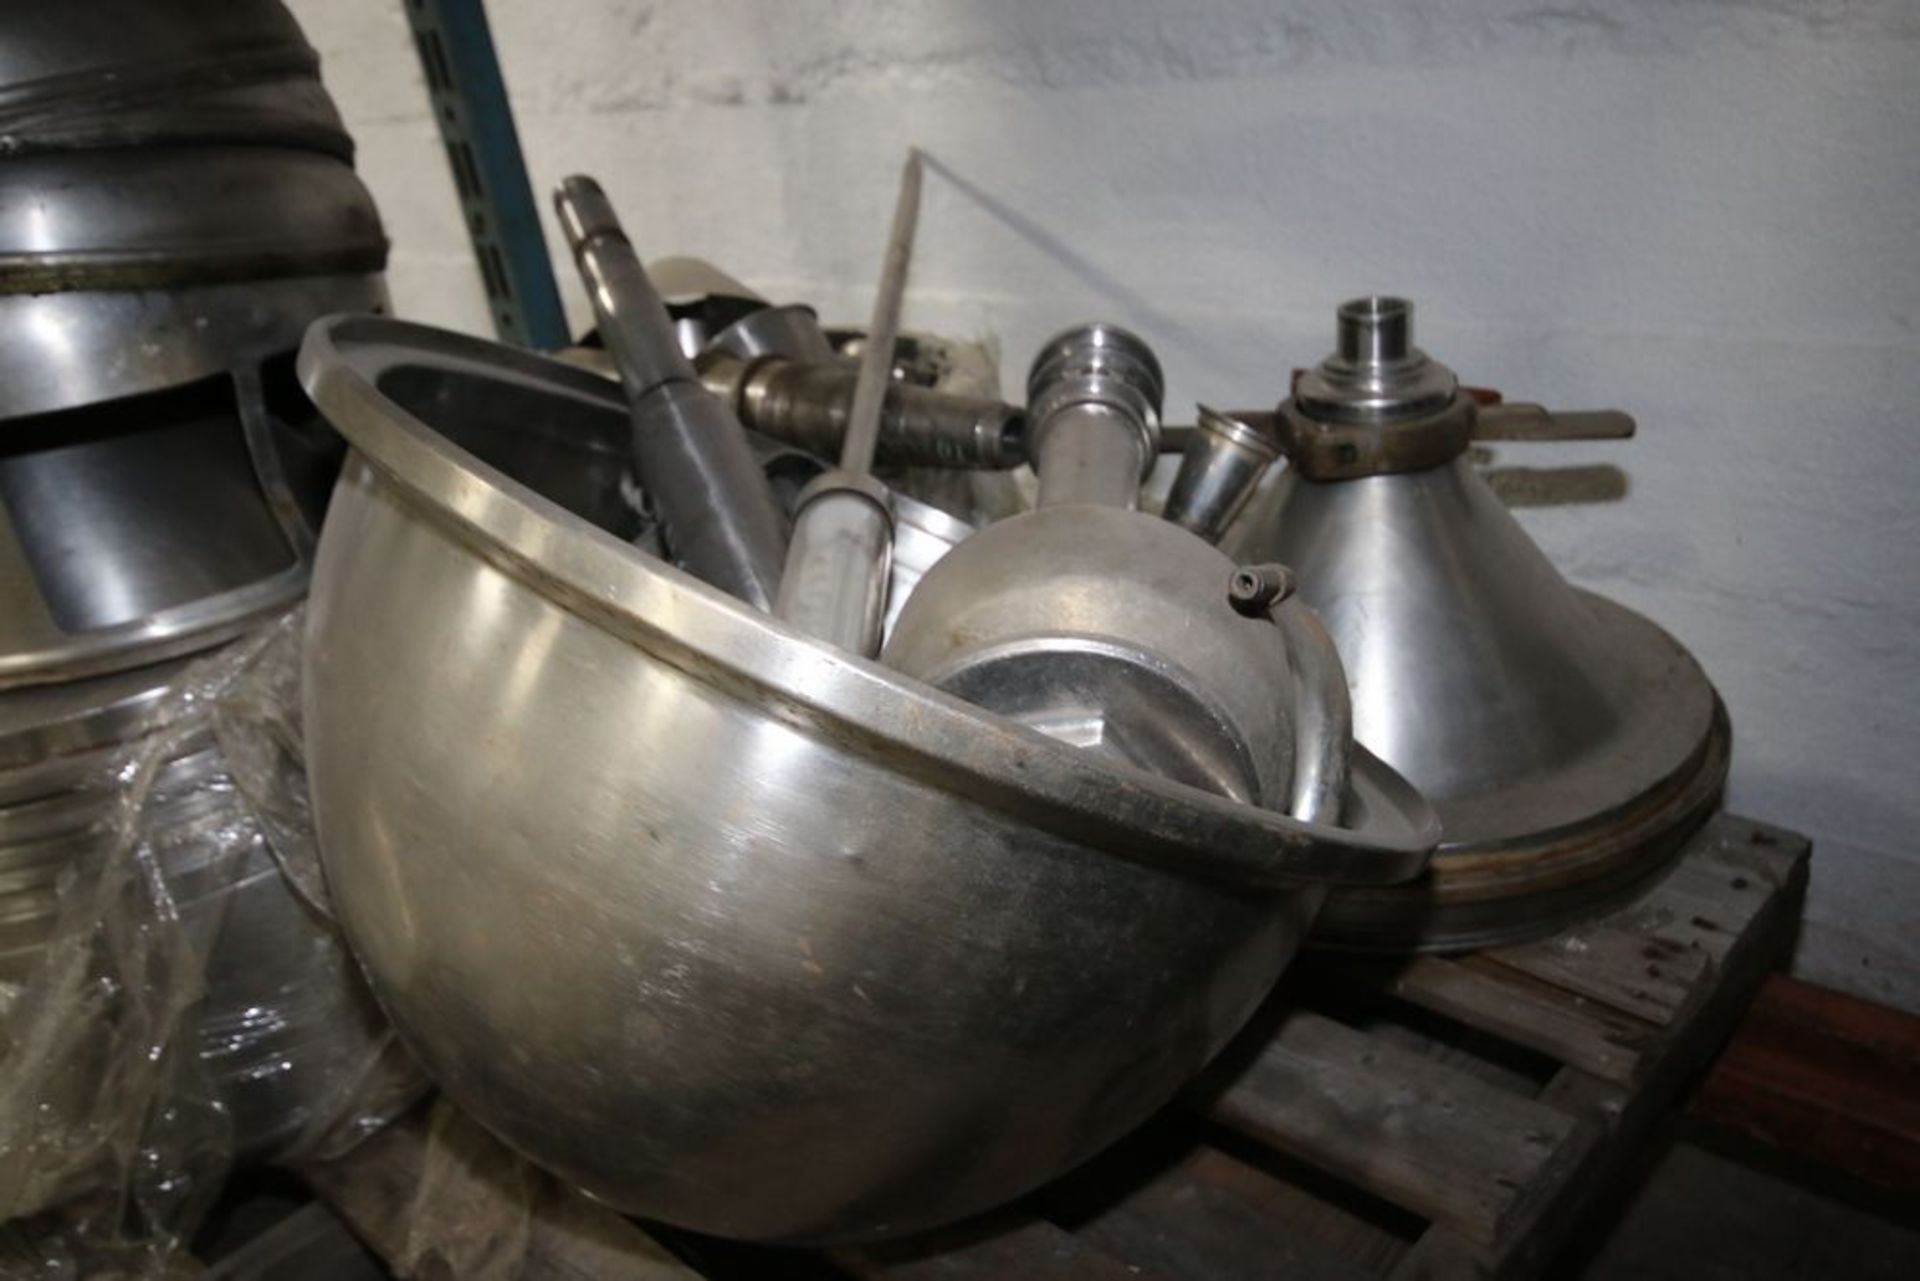 S/S Separator Inc. Separator Bodies, with S/S Separator Disks & S/S Separator Bowls (TG) - Image 18 of 20